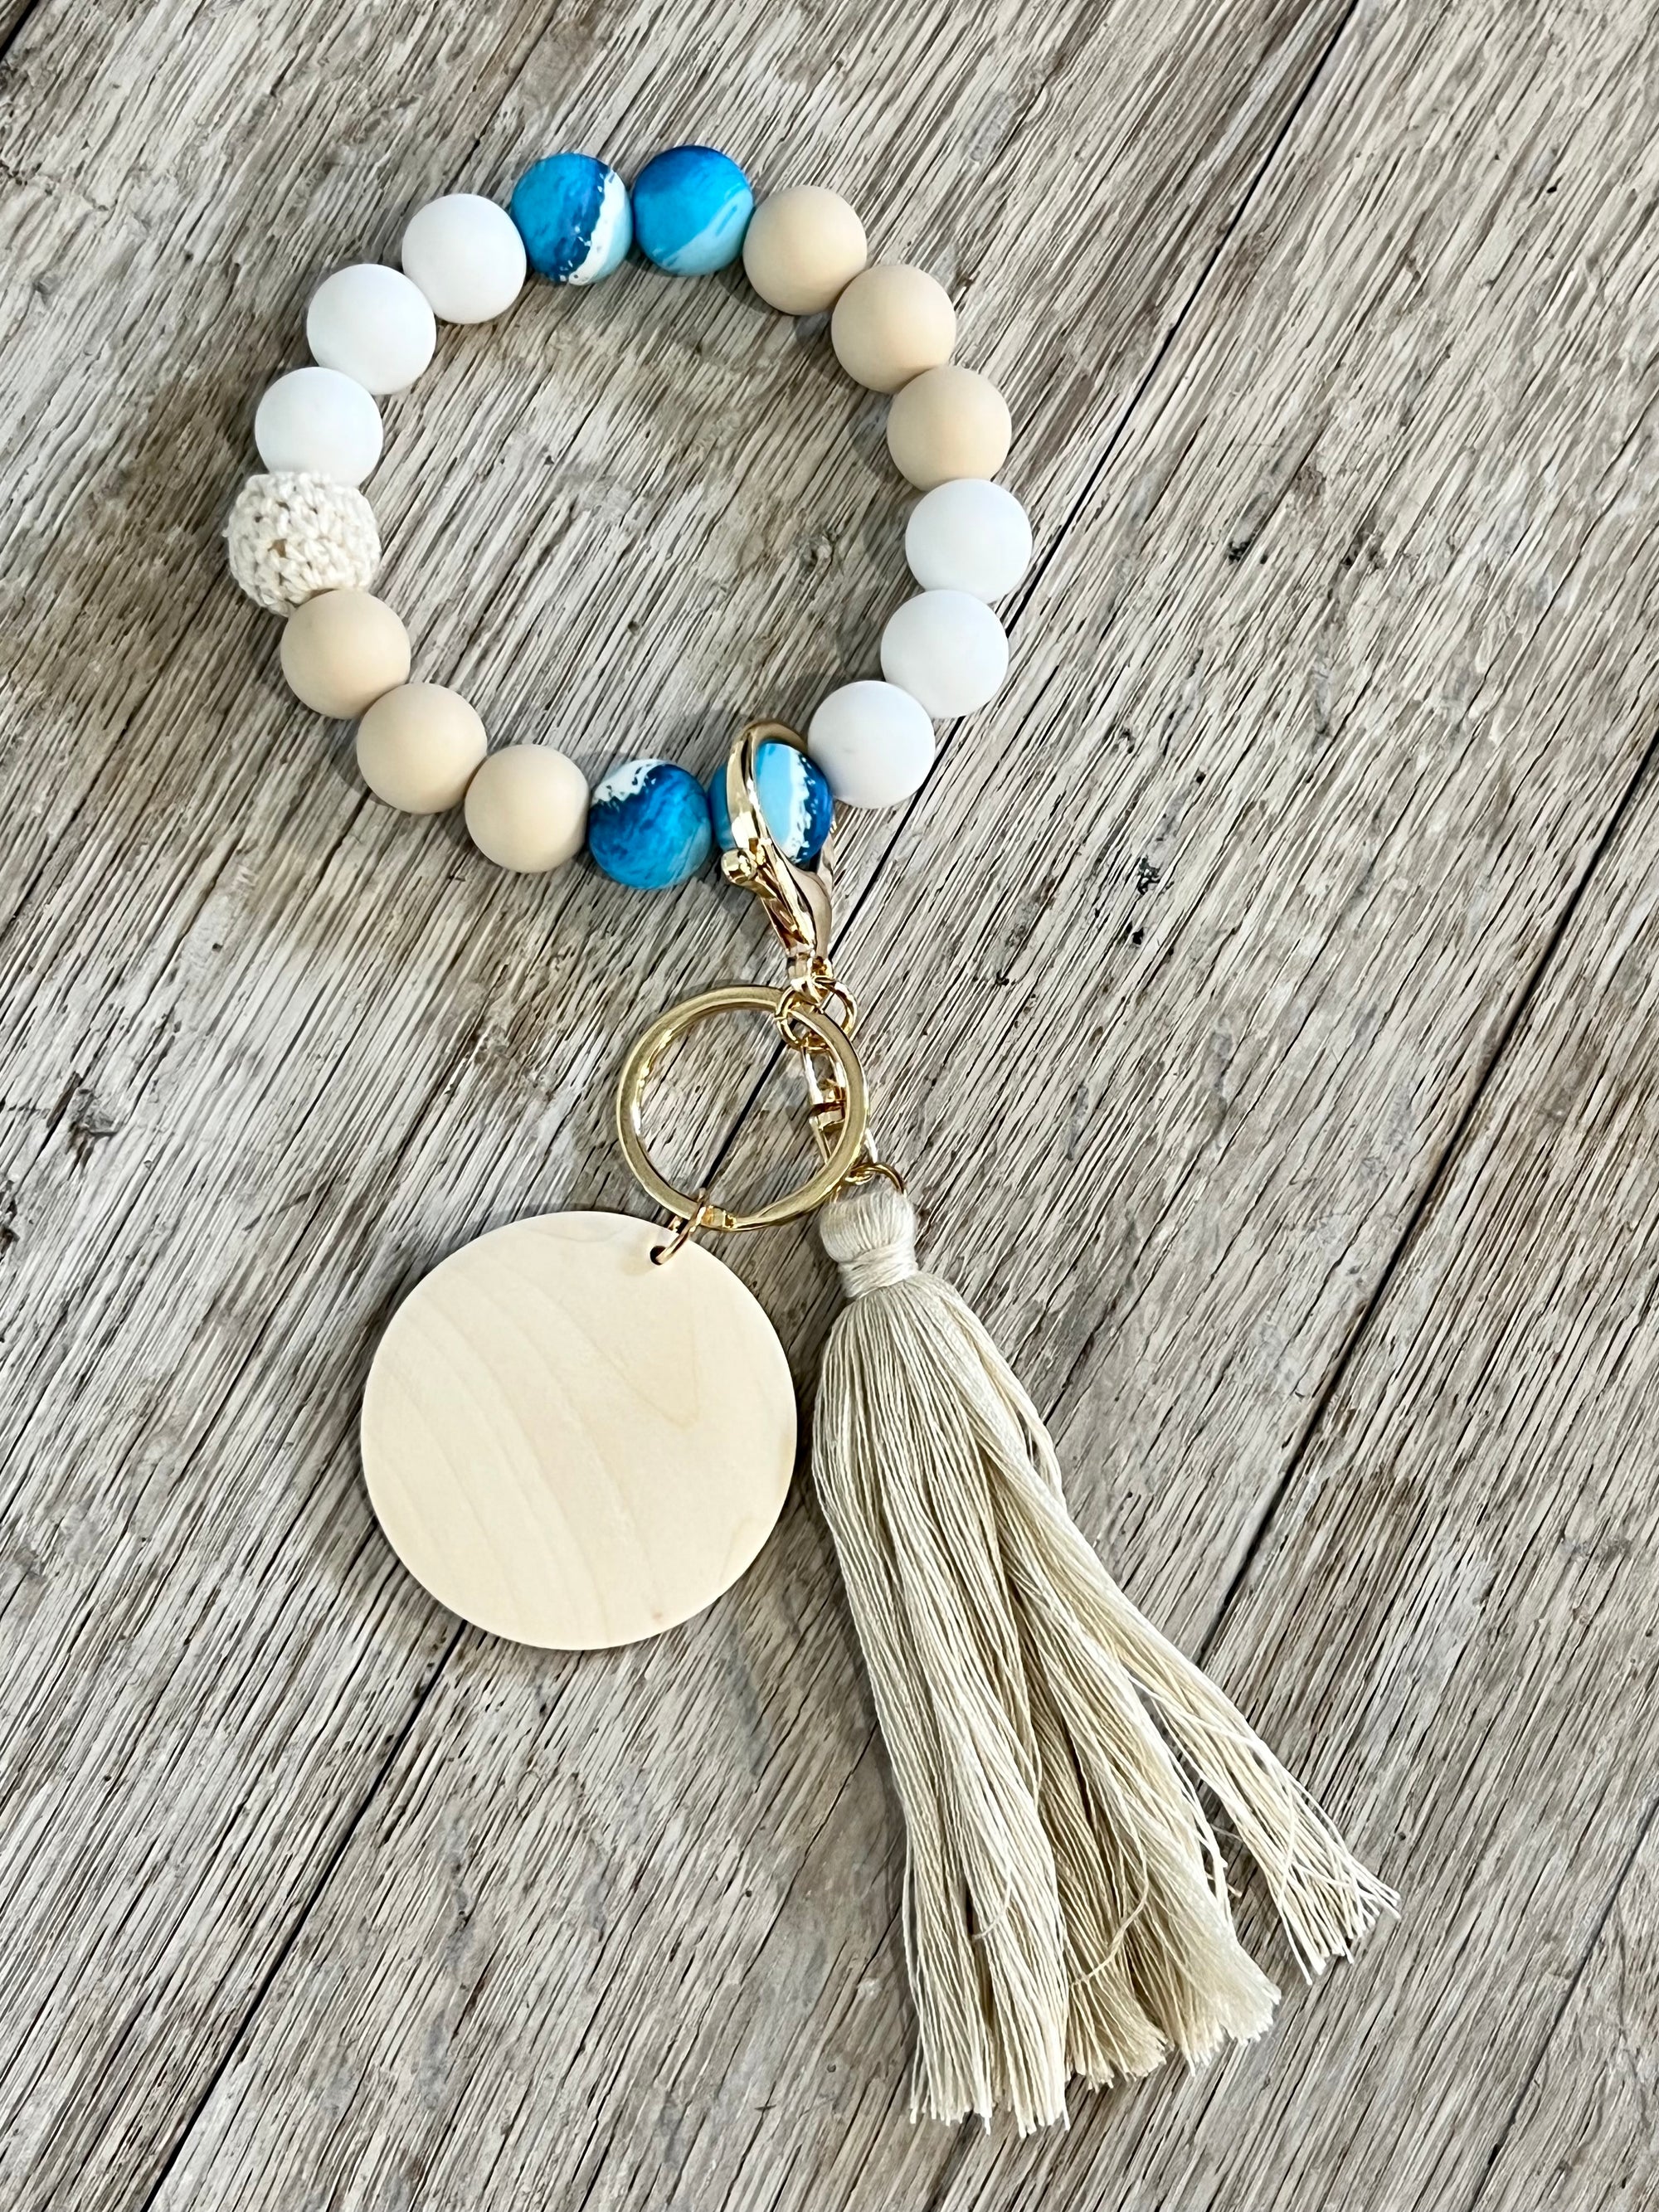 Boho Silicone Bead Tassel Keychain with Wooden Disc – Cows and Blanks